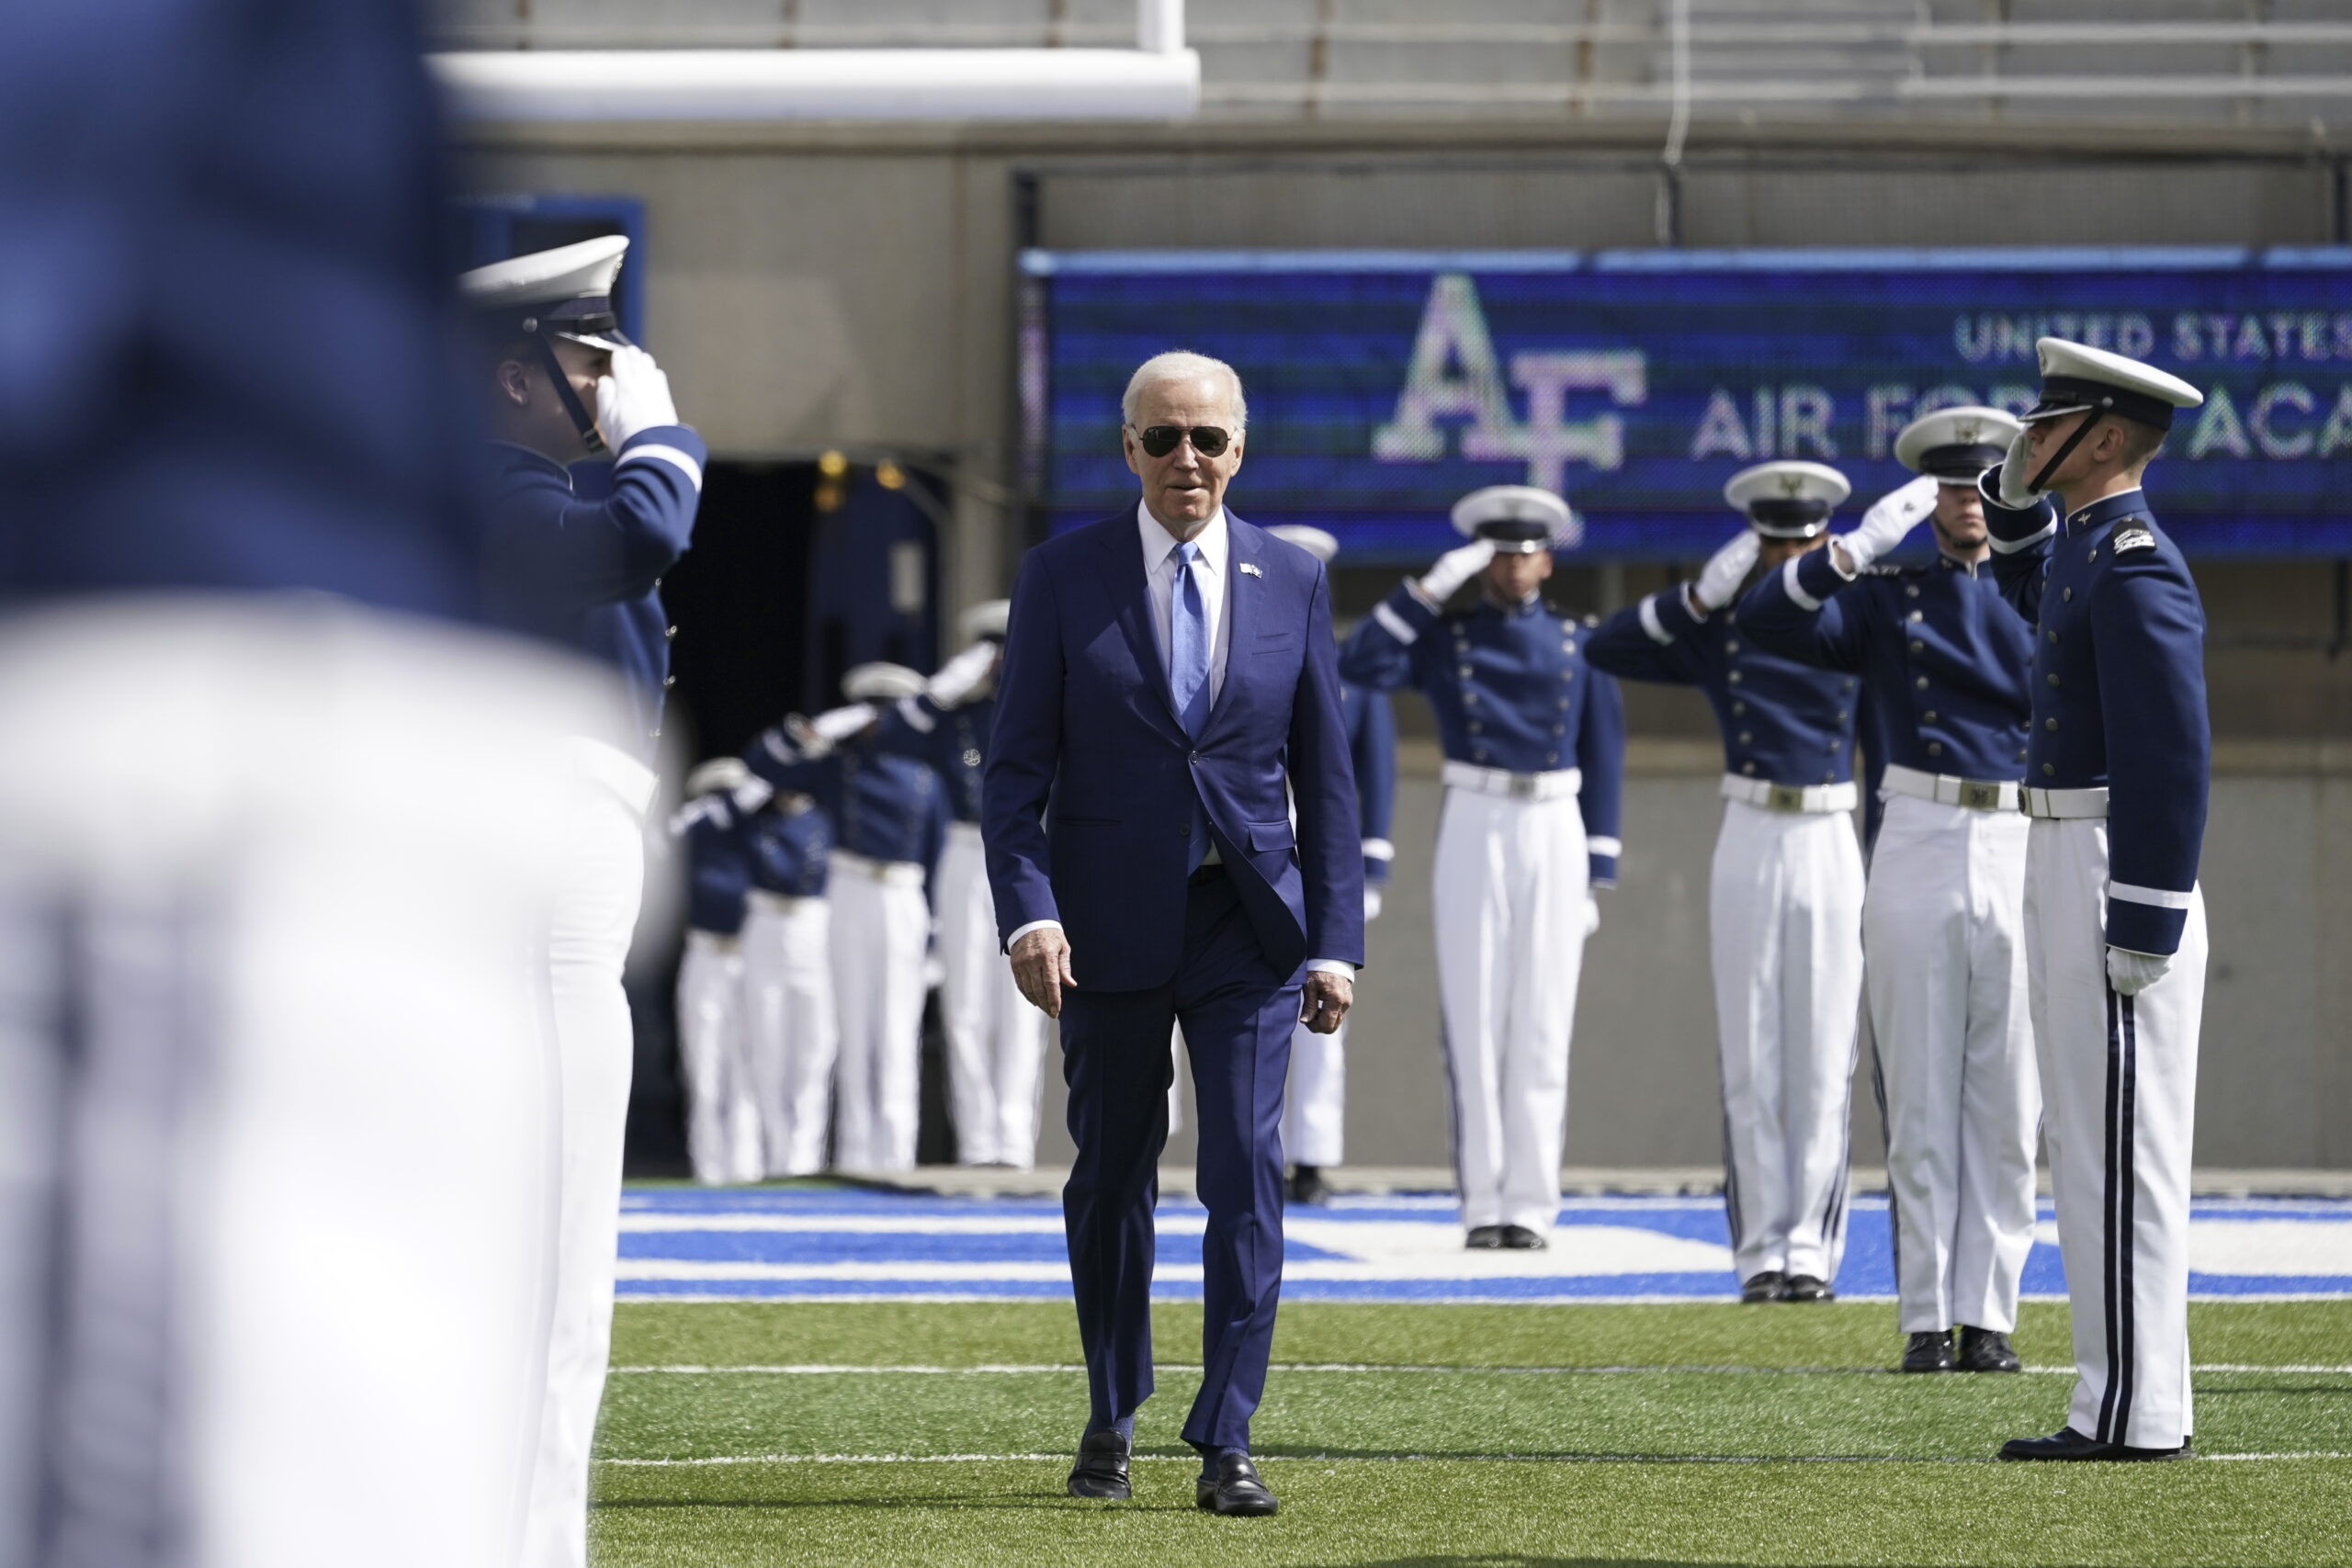 President Joe Biden arrives to the 2023 United States Air Force Academy Graduation Ceremony at Falc...